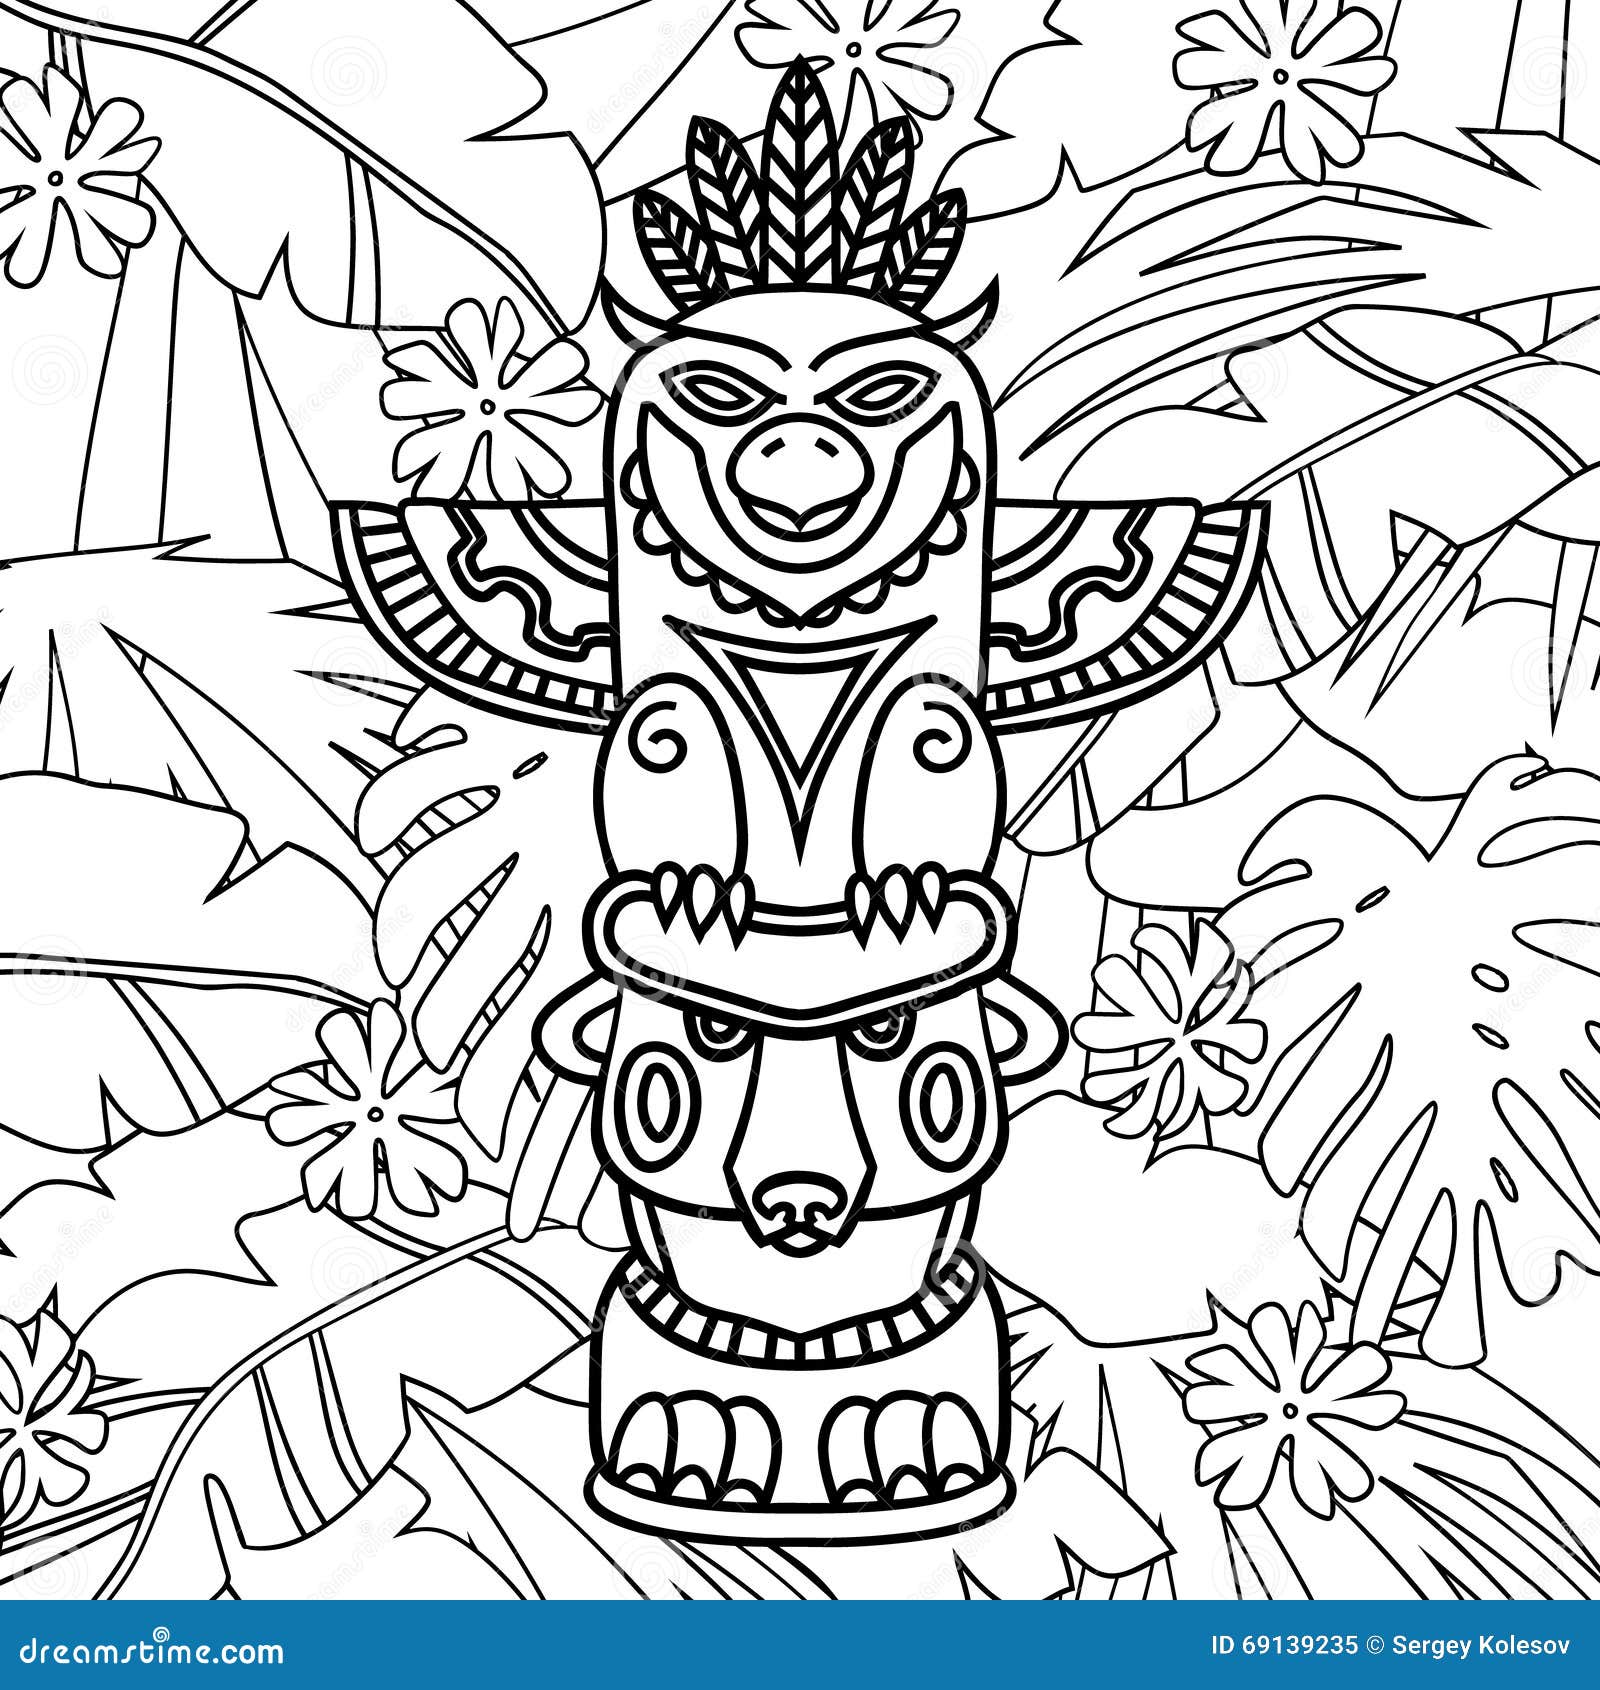 Doodle traditional tribal totem pole on plants background coloring book stock vector